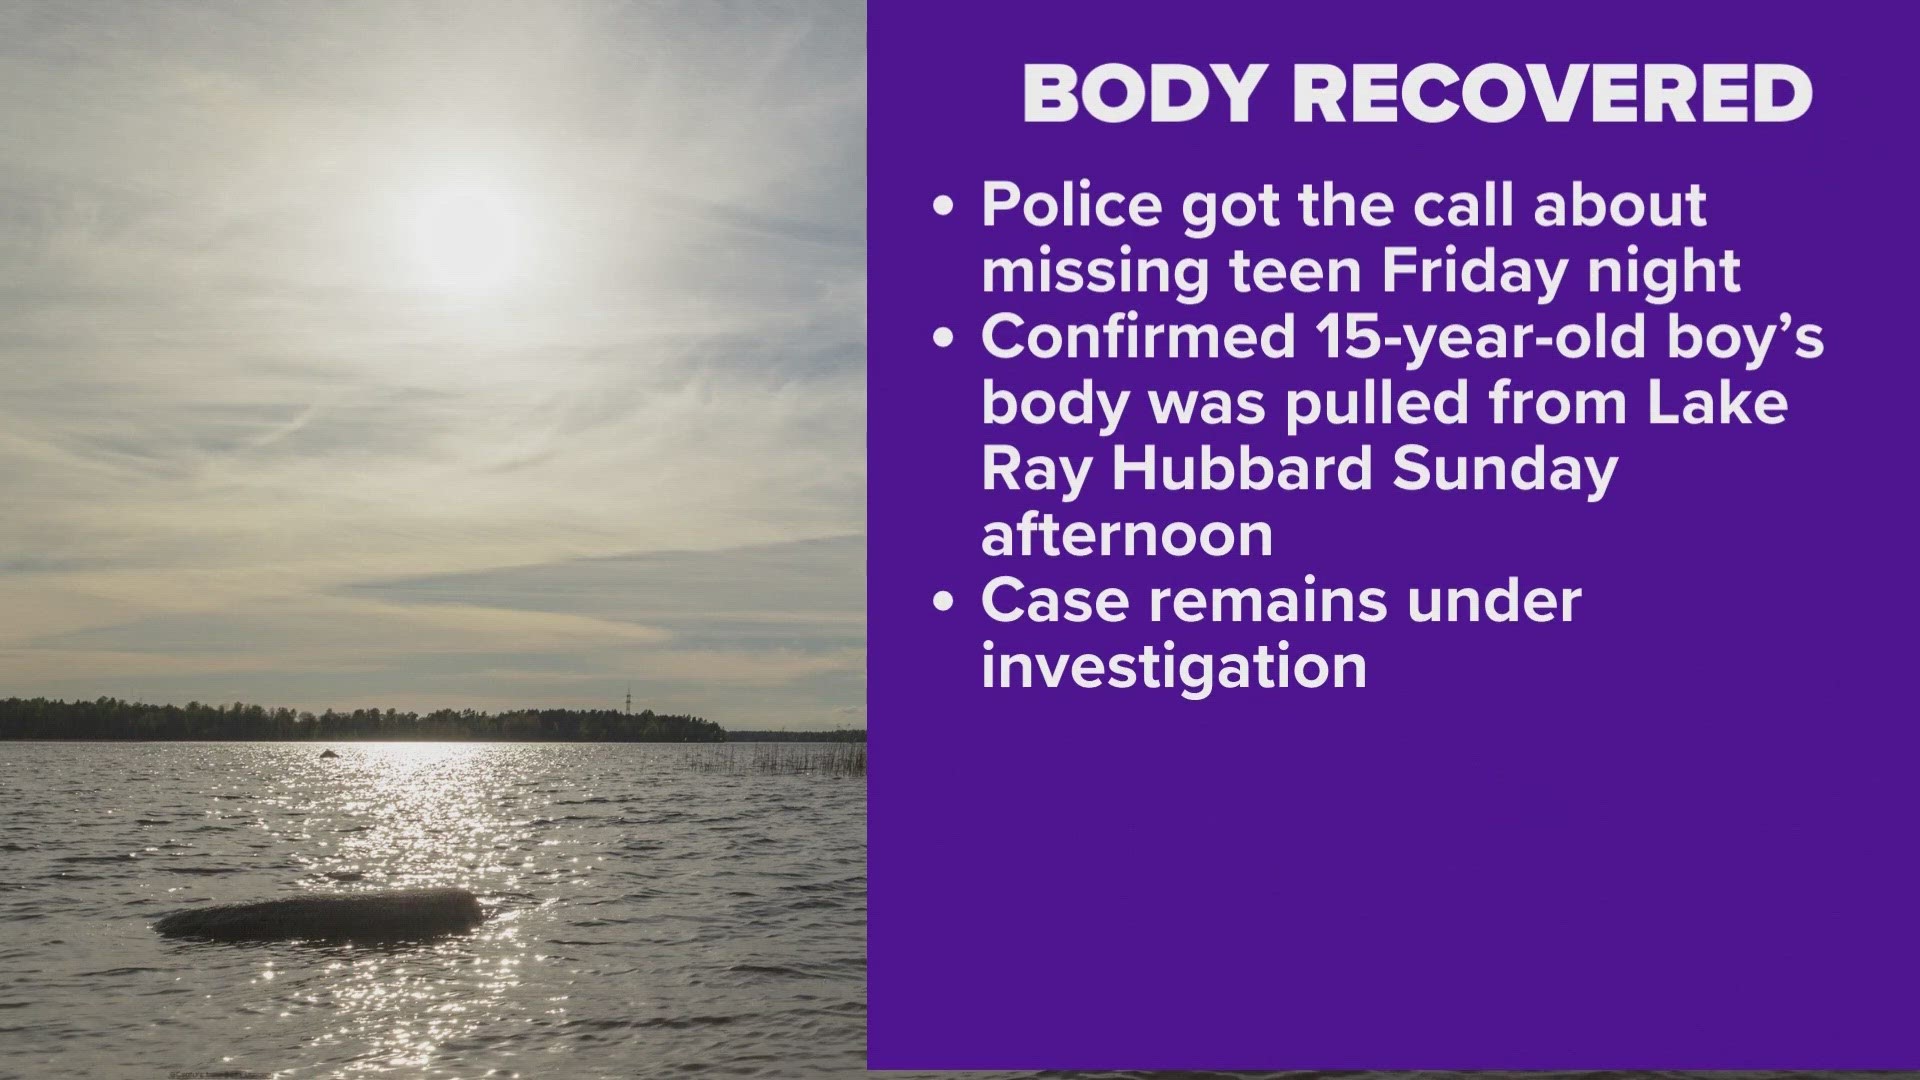 Police confirmed the boy's body was pulled from lake ray hubbard Sunday afternoon.